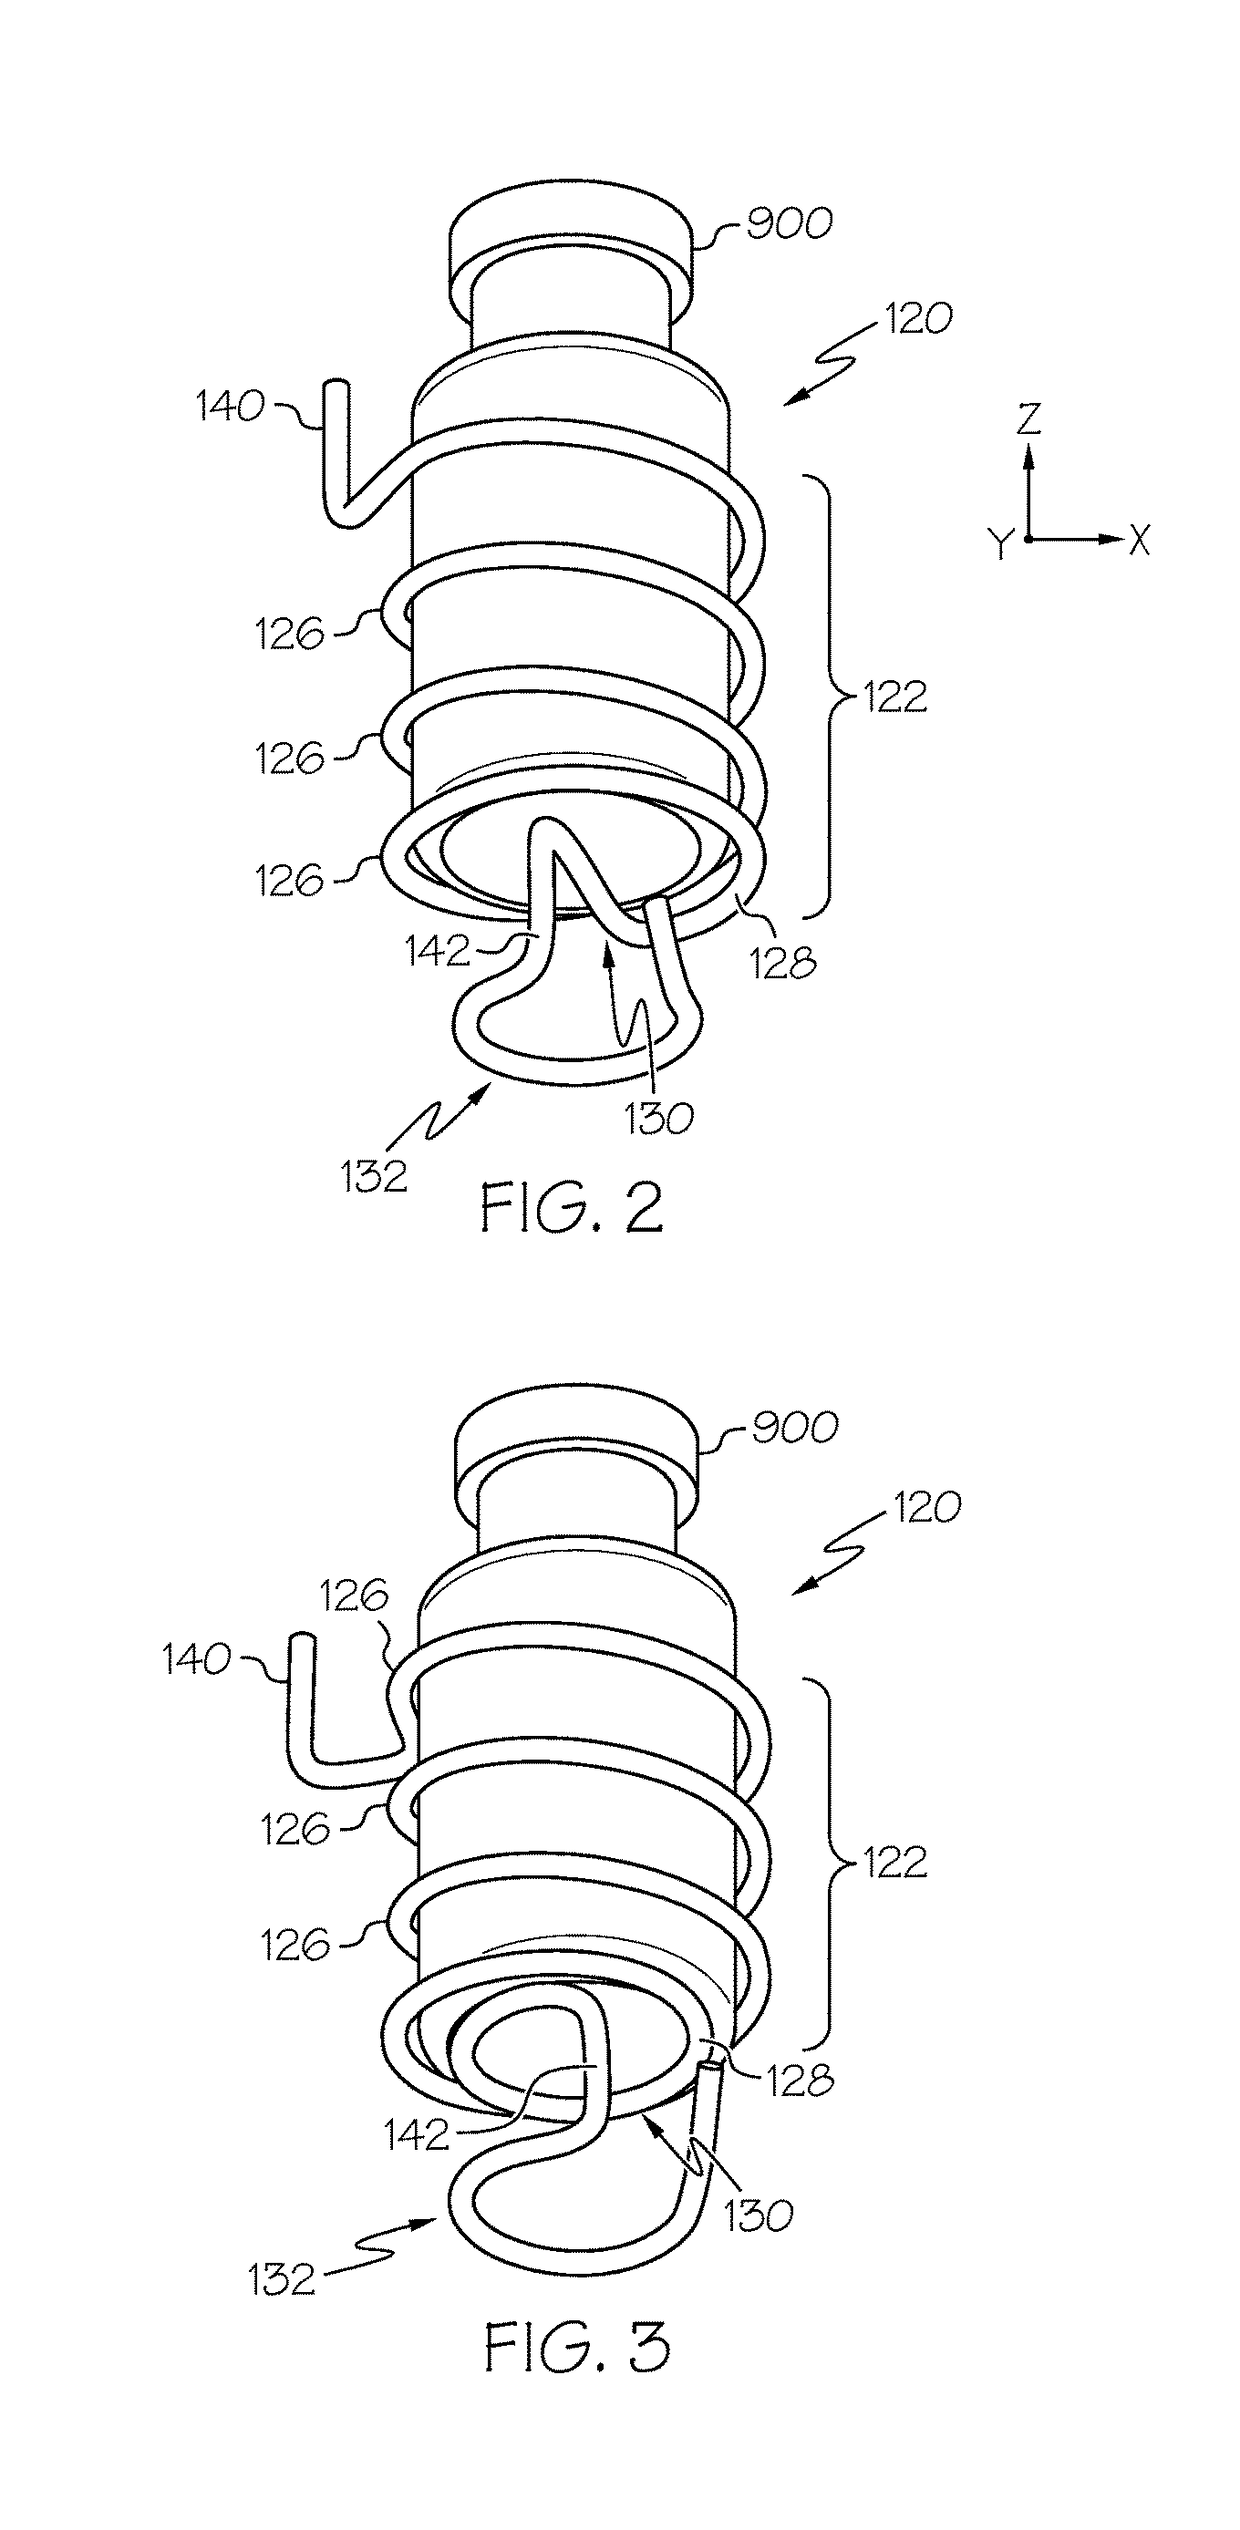 Magazine apparatuses for holding glassware during processing